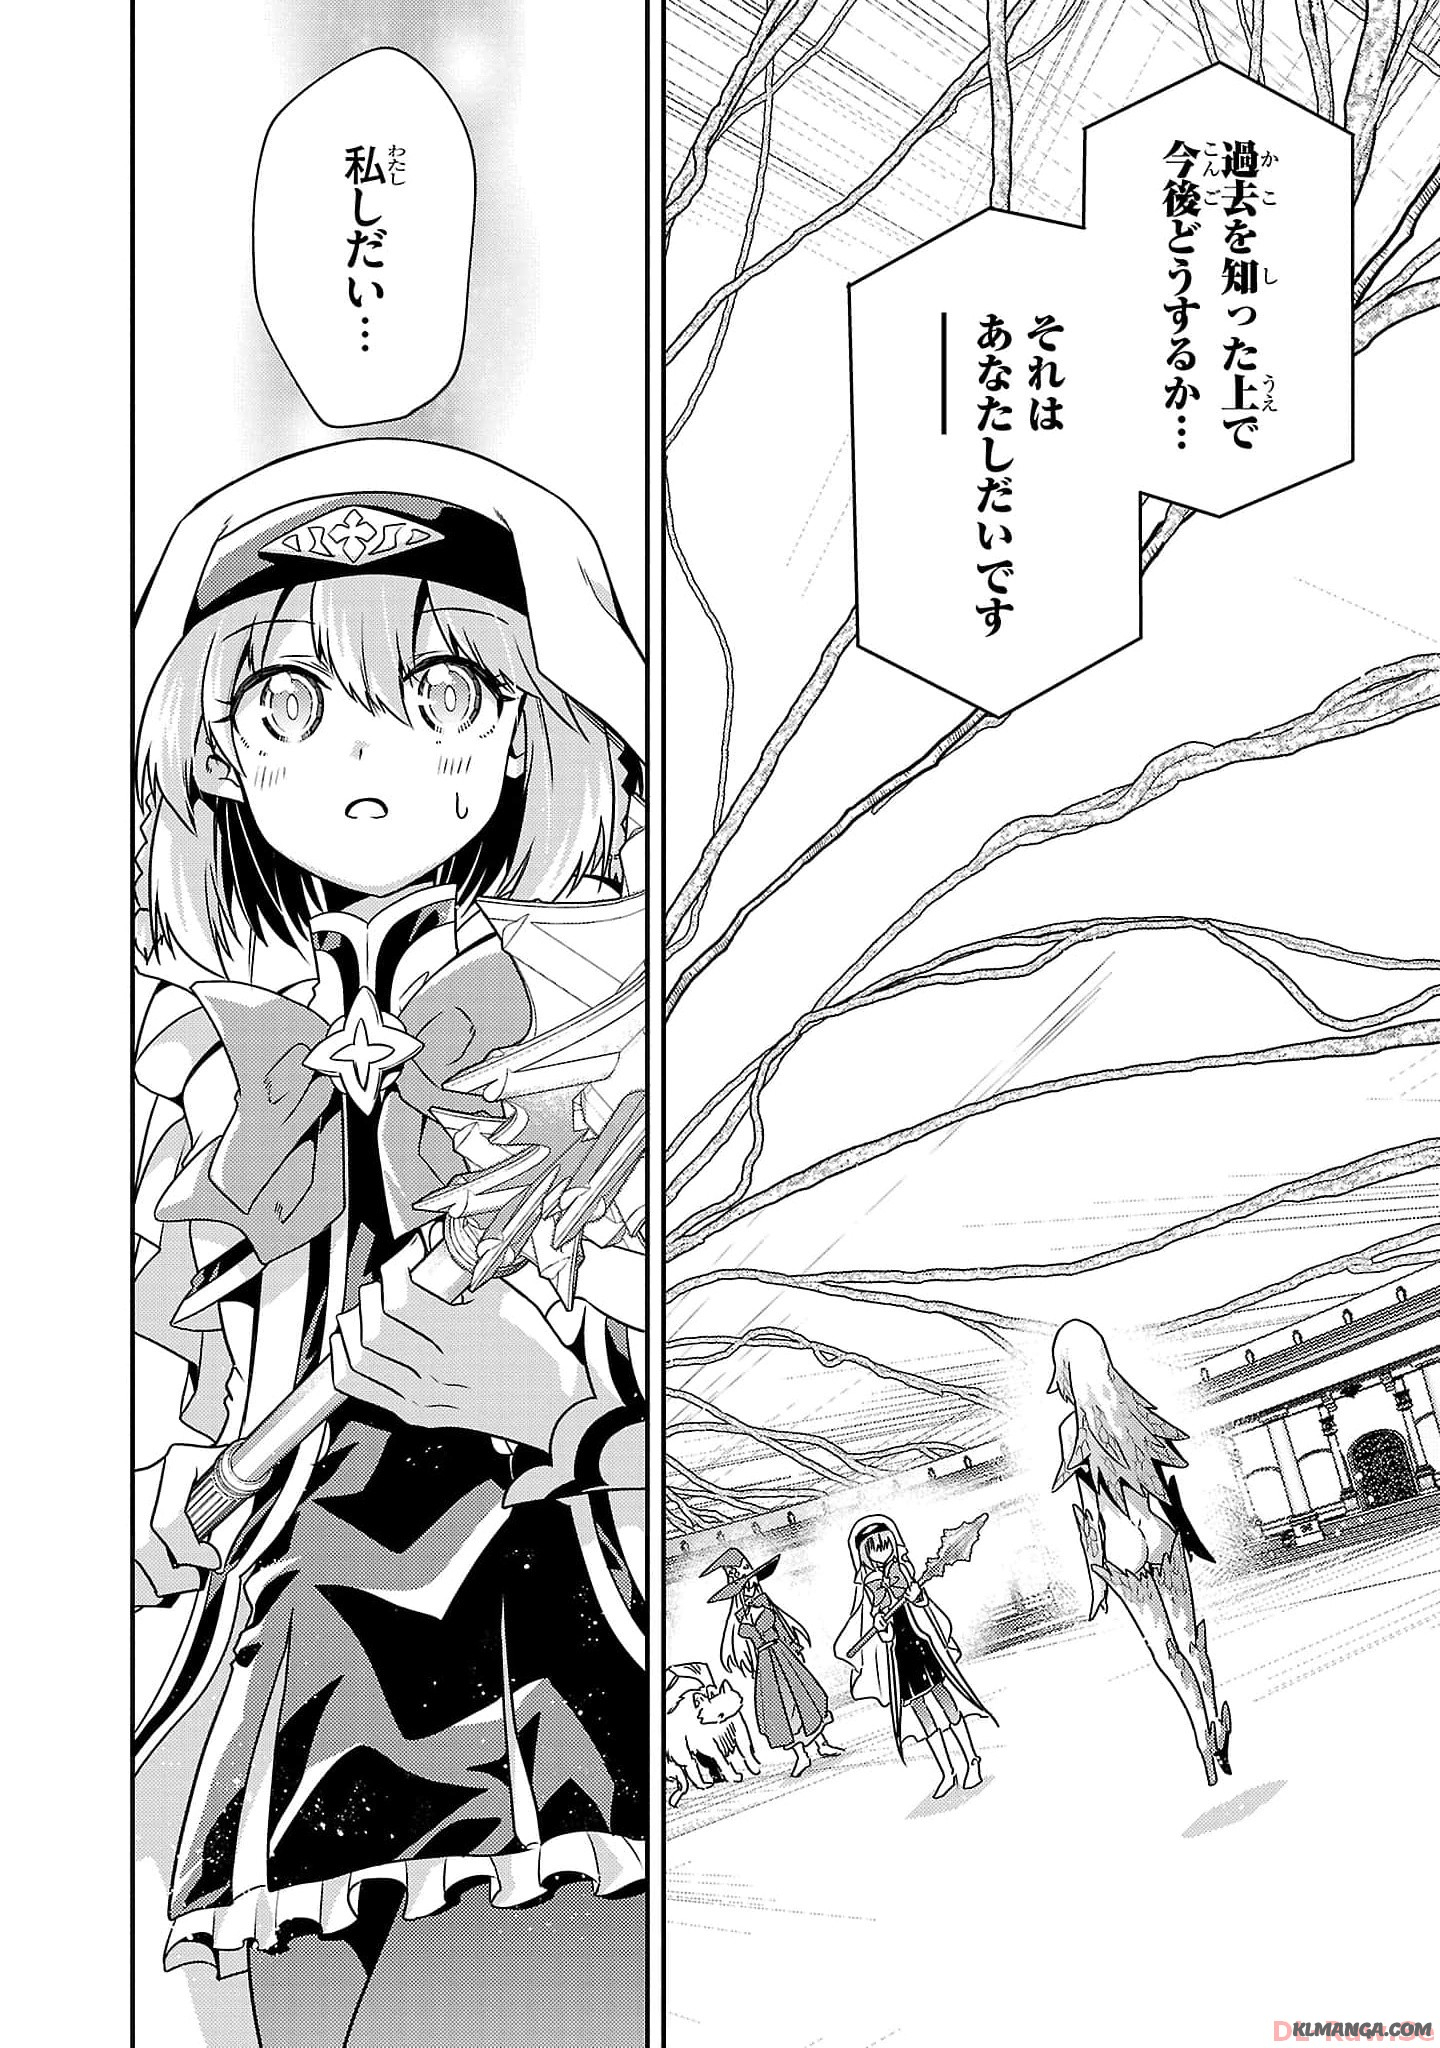 Hungry Saint and Full-Stomach Witch’s Slow Life in Another World! 腹ペコ聖女とまんぷく魔女の異世界スローライフ! 第20話 - Page 16